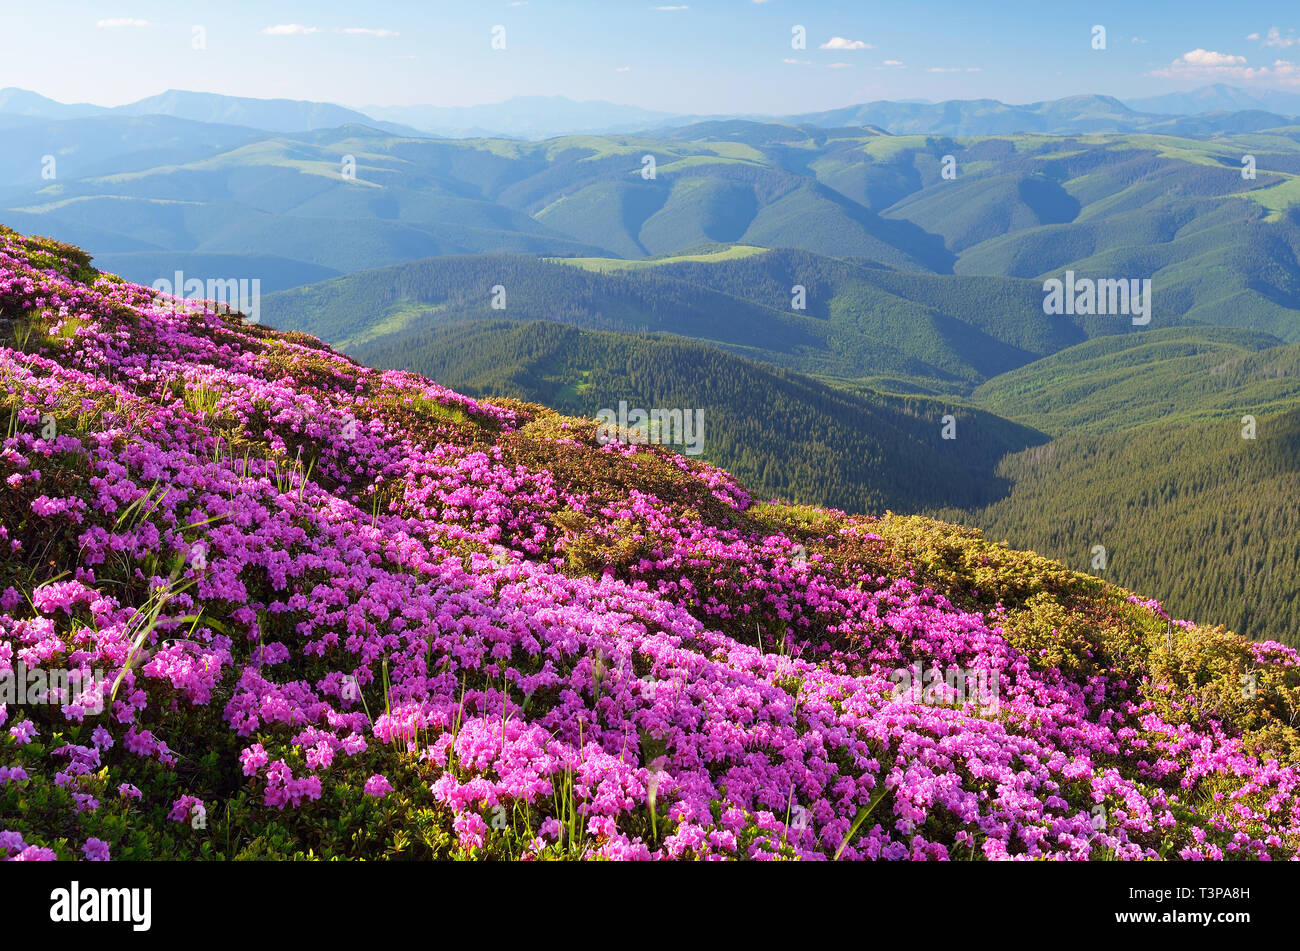 Summer landscape with blooming mountain slopes. Sunny day with rhododendron flowers Stock Photo